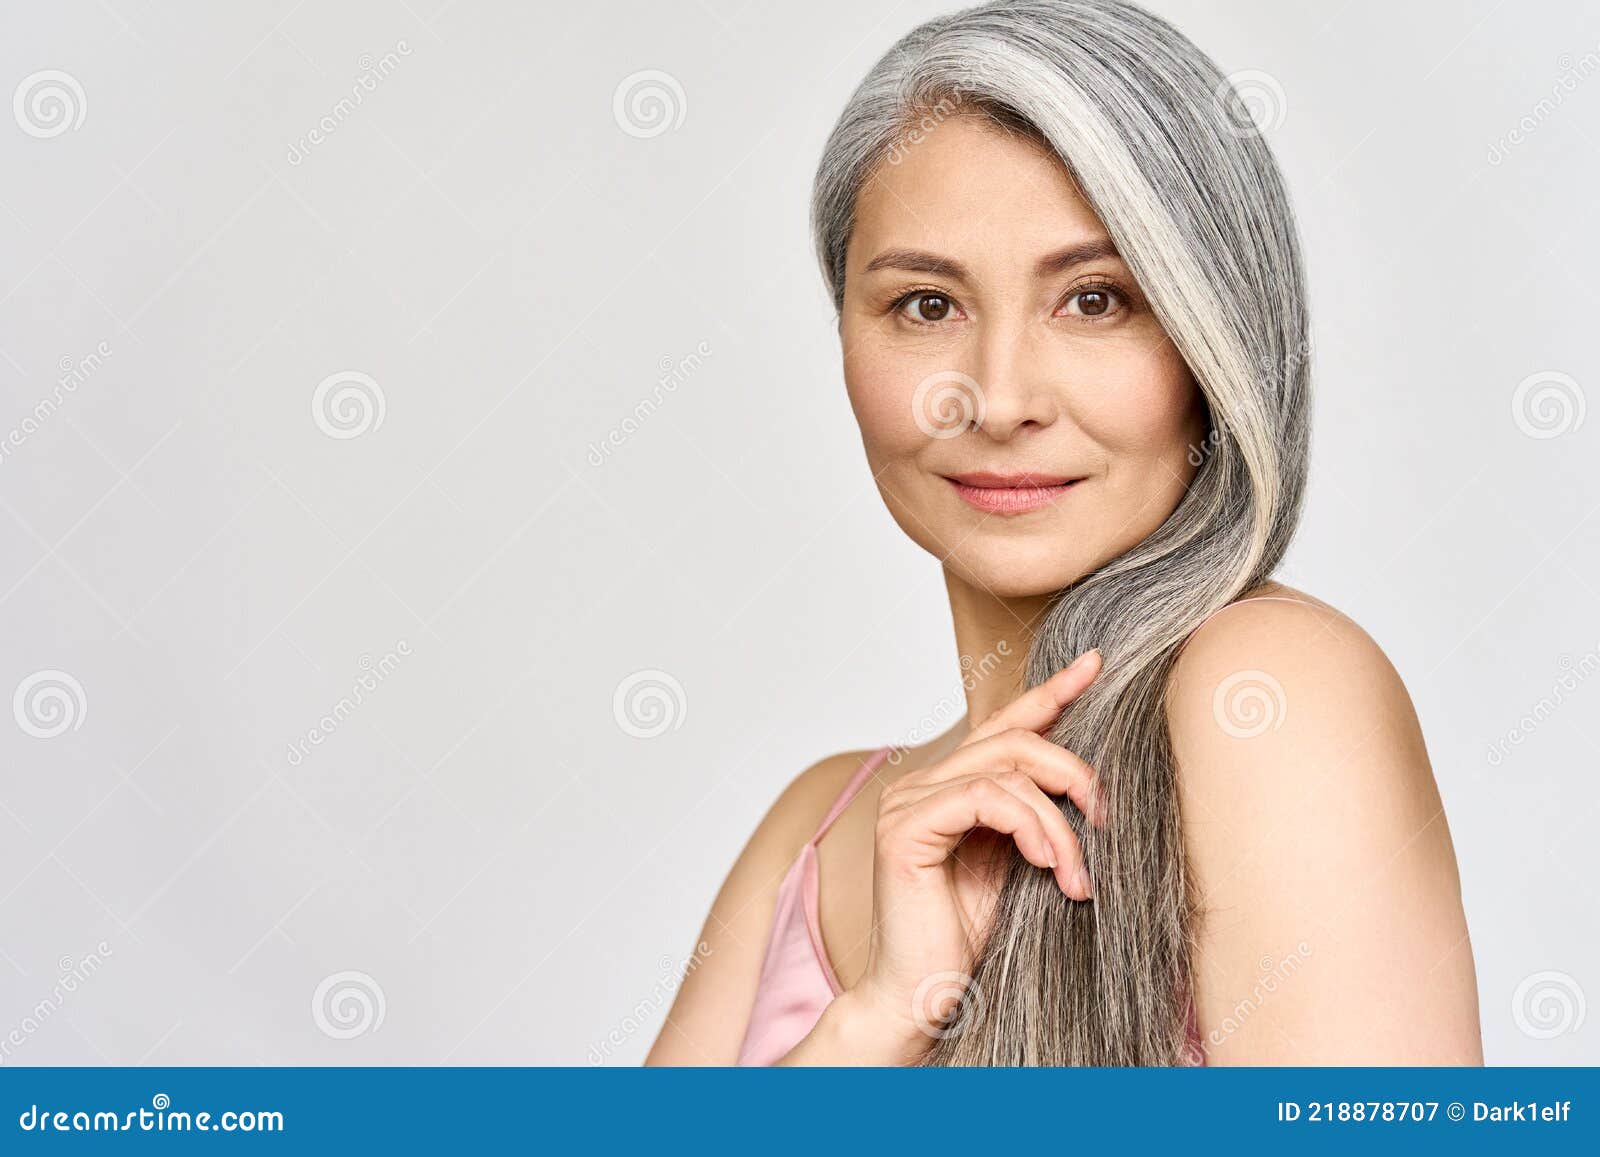 senior happy middle aged mature asian woman headshot portrait. hair care advertising.